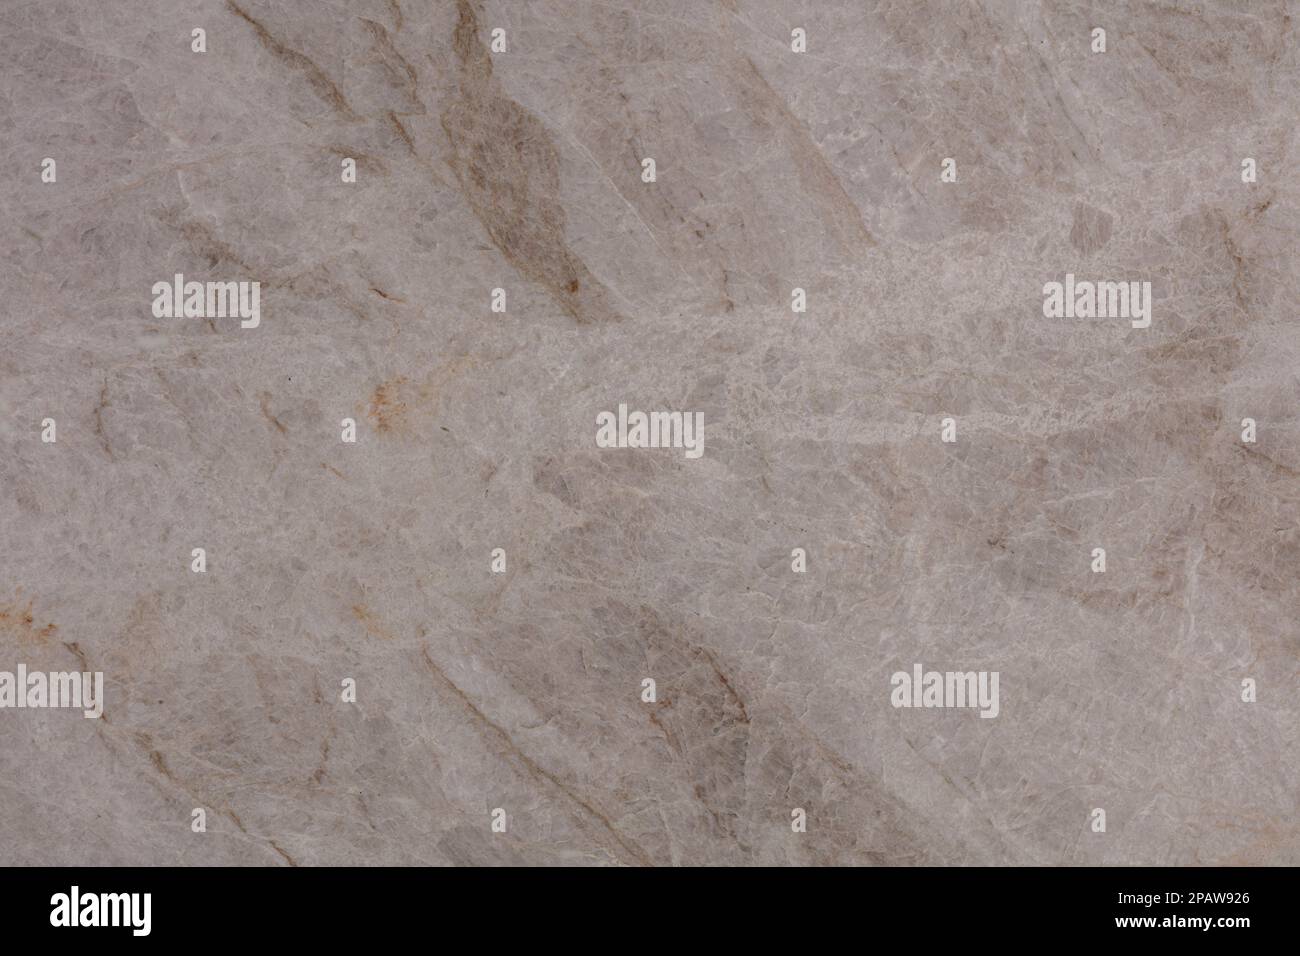 Beautiful Taj Mahal calcite background in gentle grey tone, photo of slab texture for your new home interior. Stock Photo